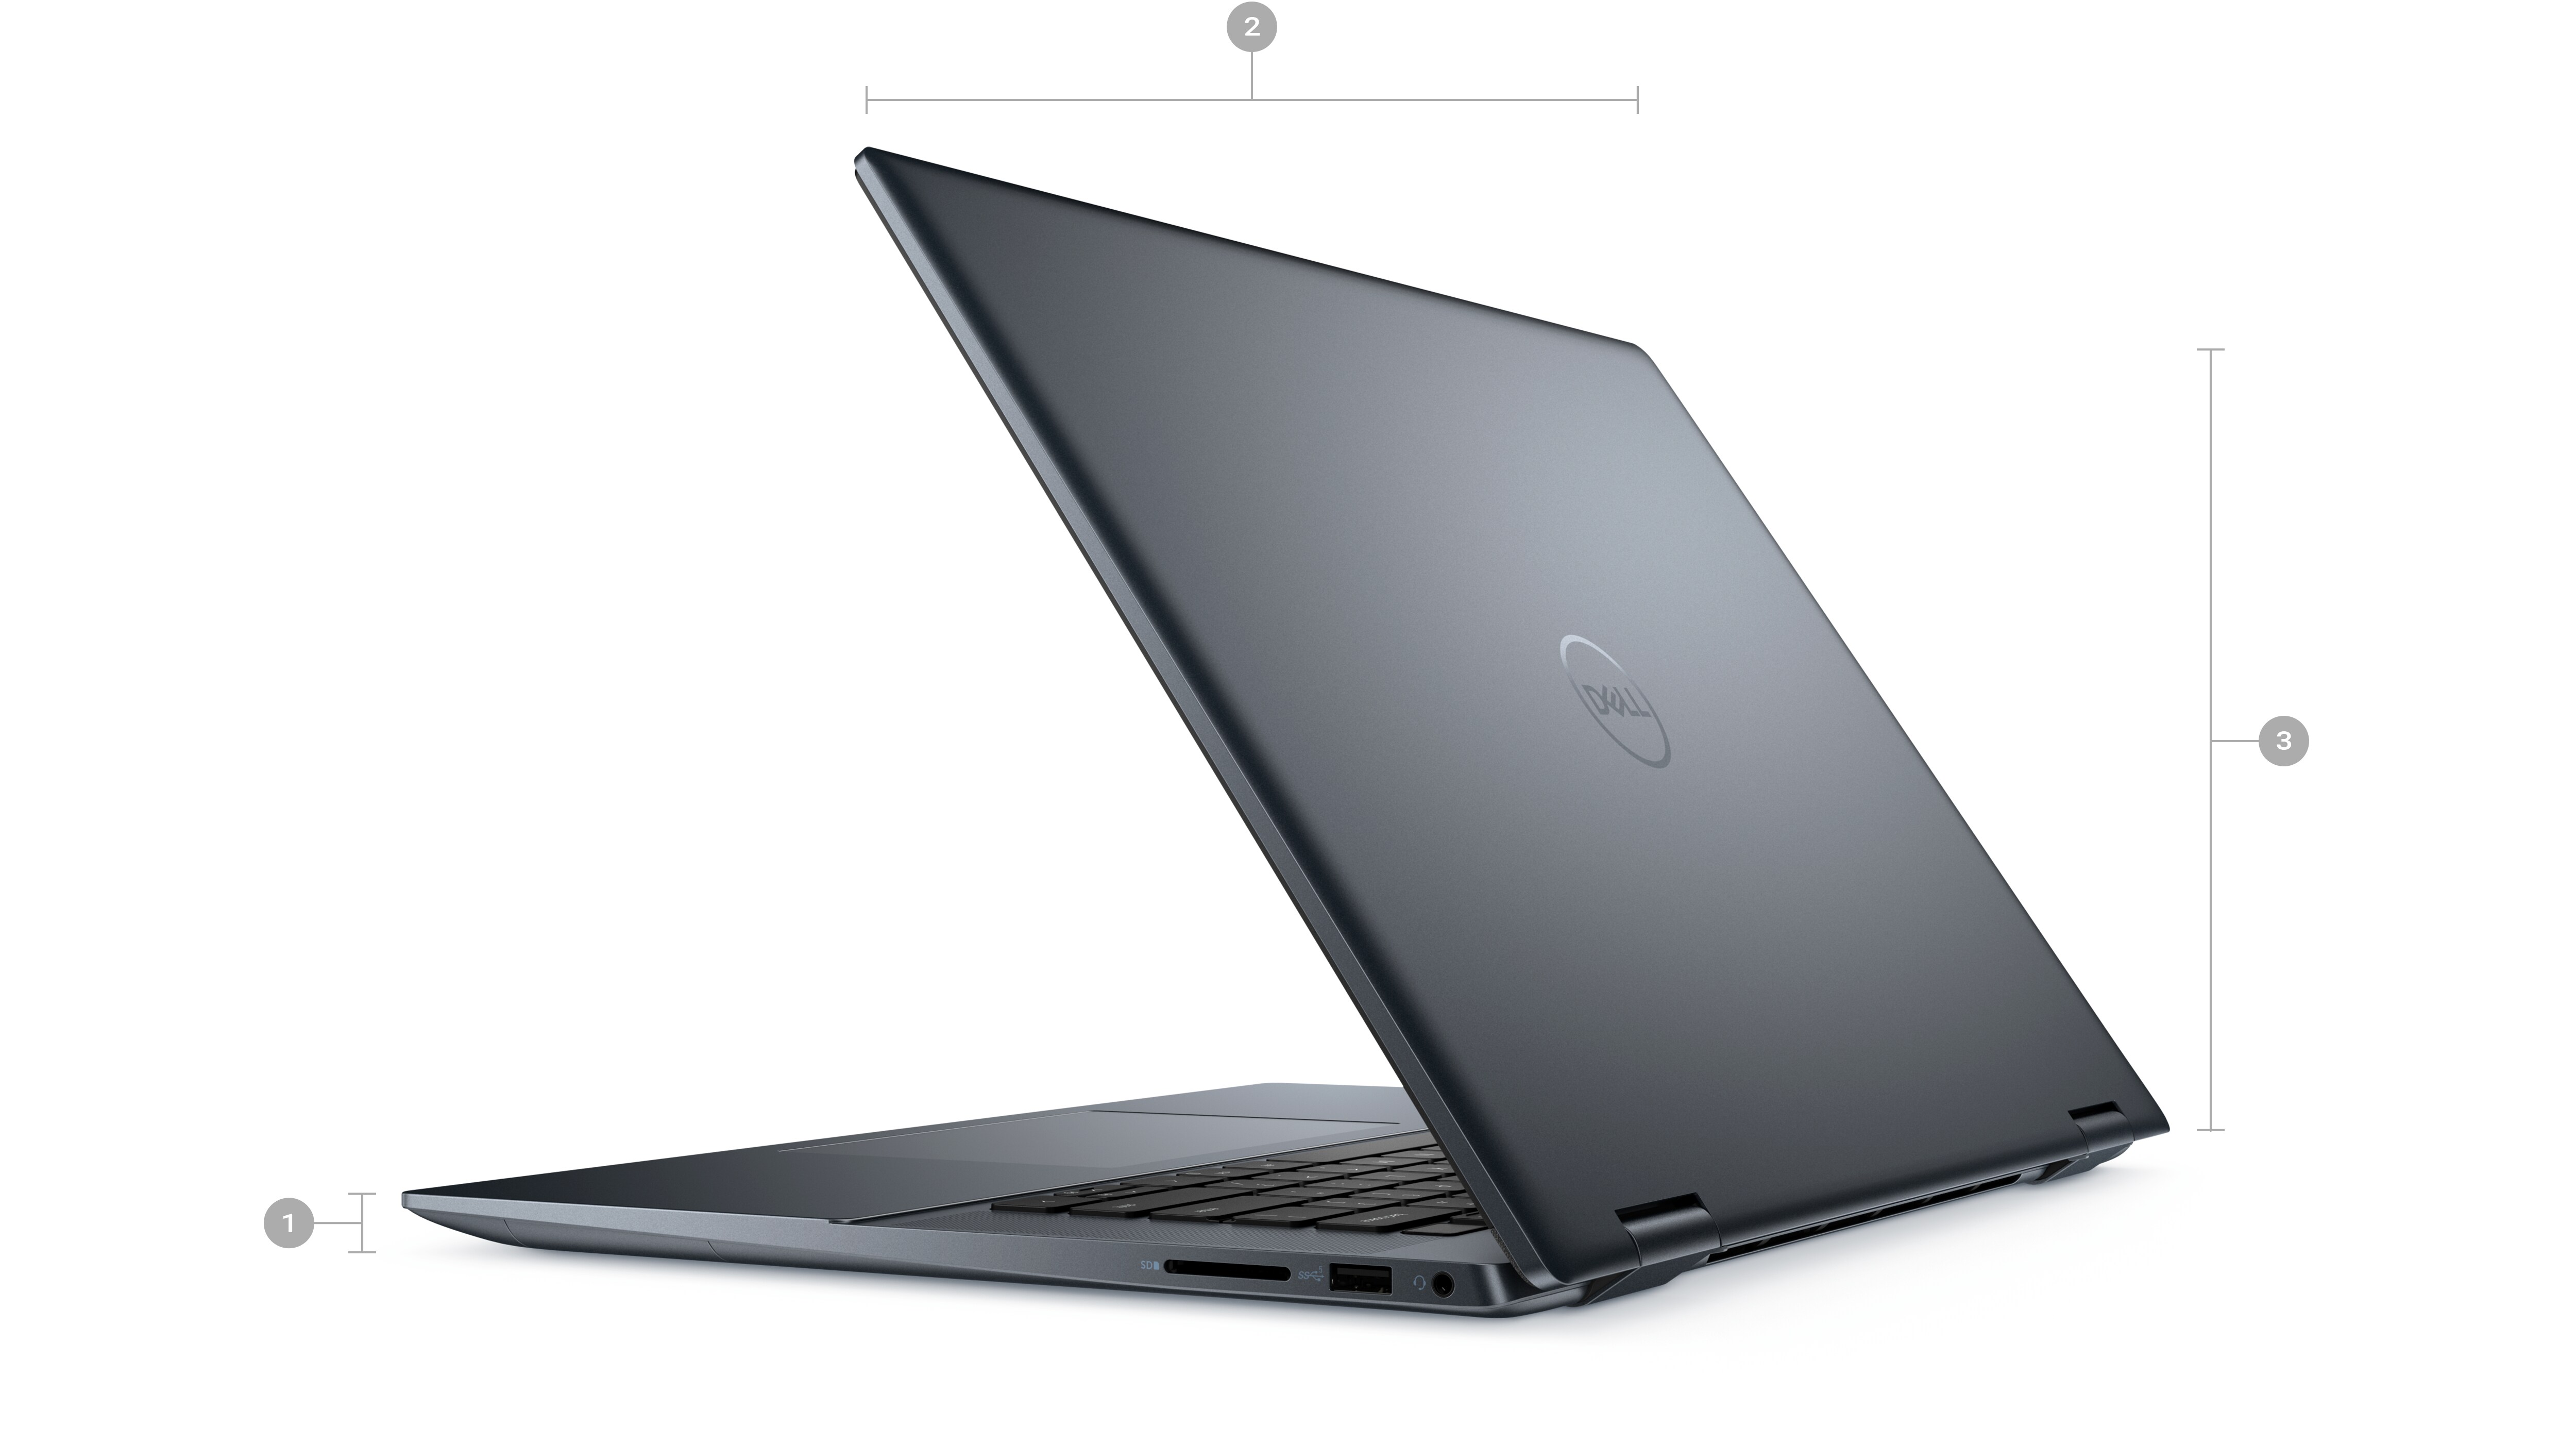 Dell Inspiron 16 2-in-1 7635 Laptop with numbers from 1 to 3 showing the product dimensions and weight.